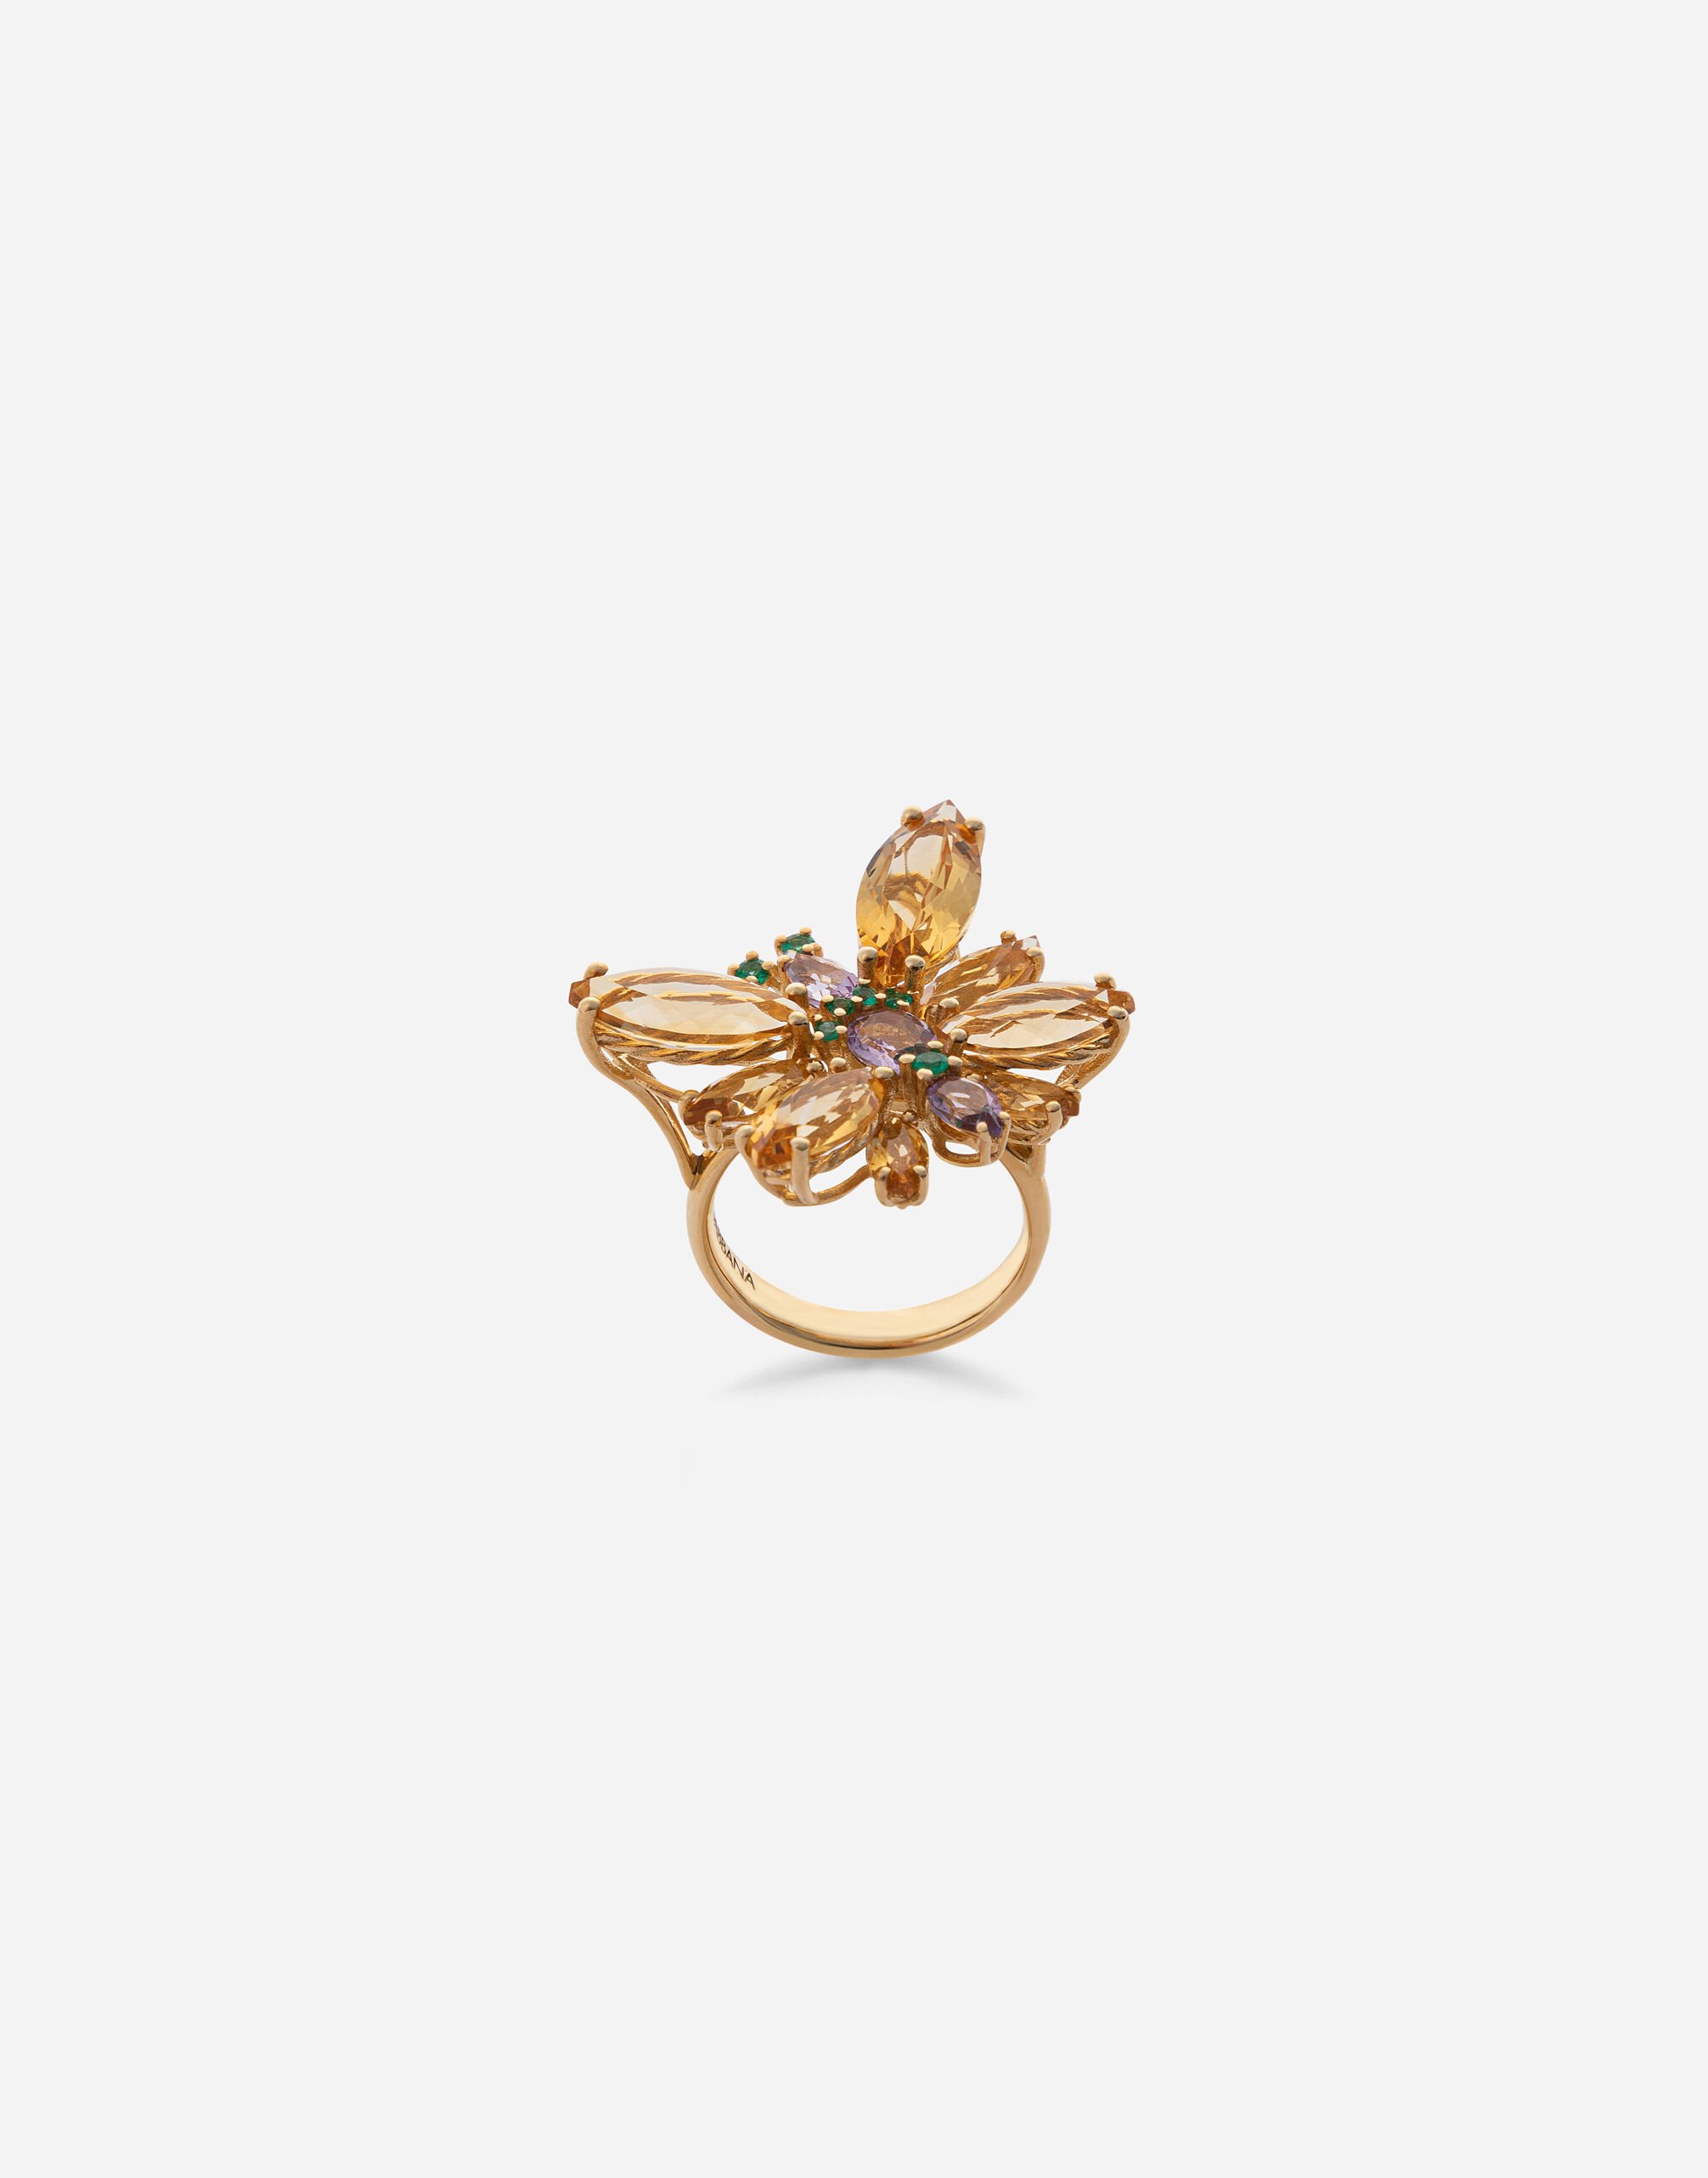 Spring ring in yellow 18kt gold with citrine butterfly in Gold for 